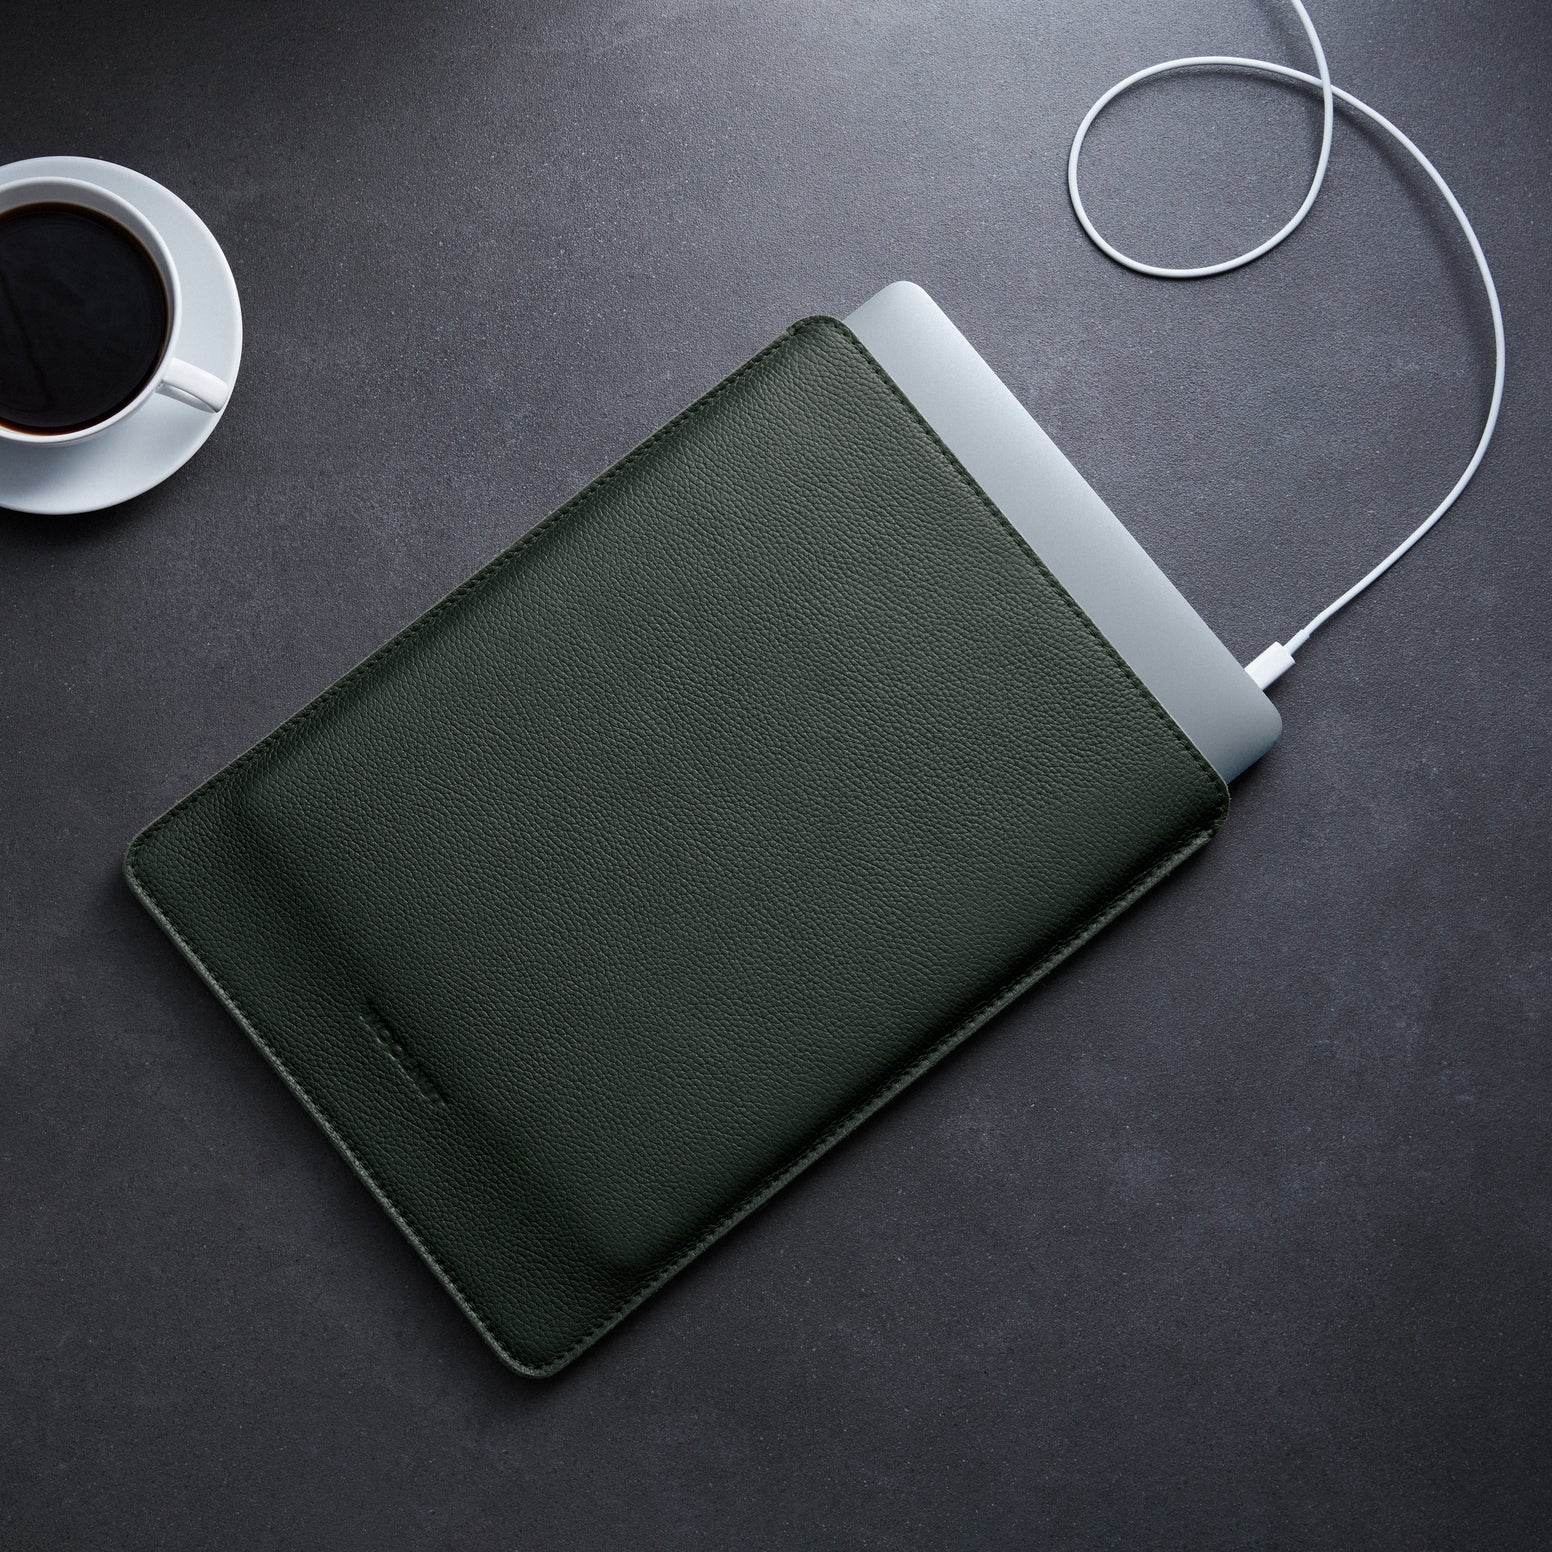 WOOLNUT Leather Sleeve for 13-inch MacBook Pro & Air - Green